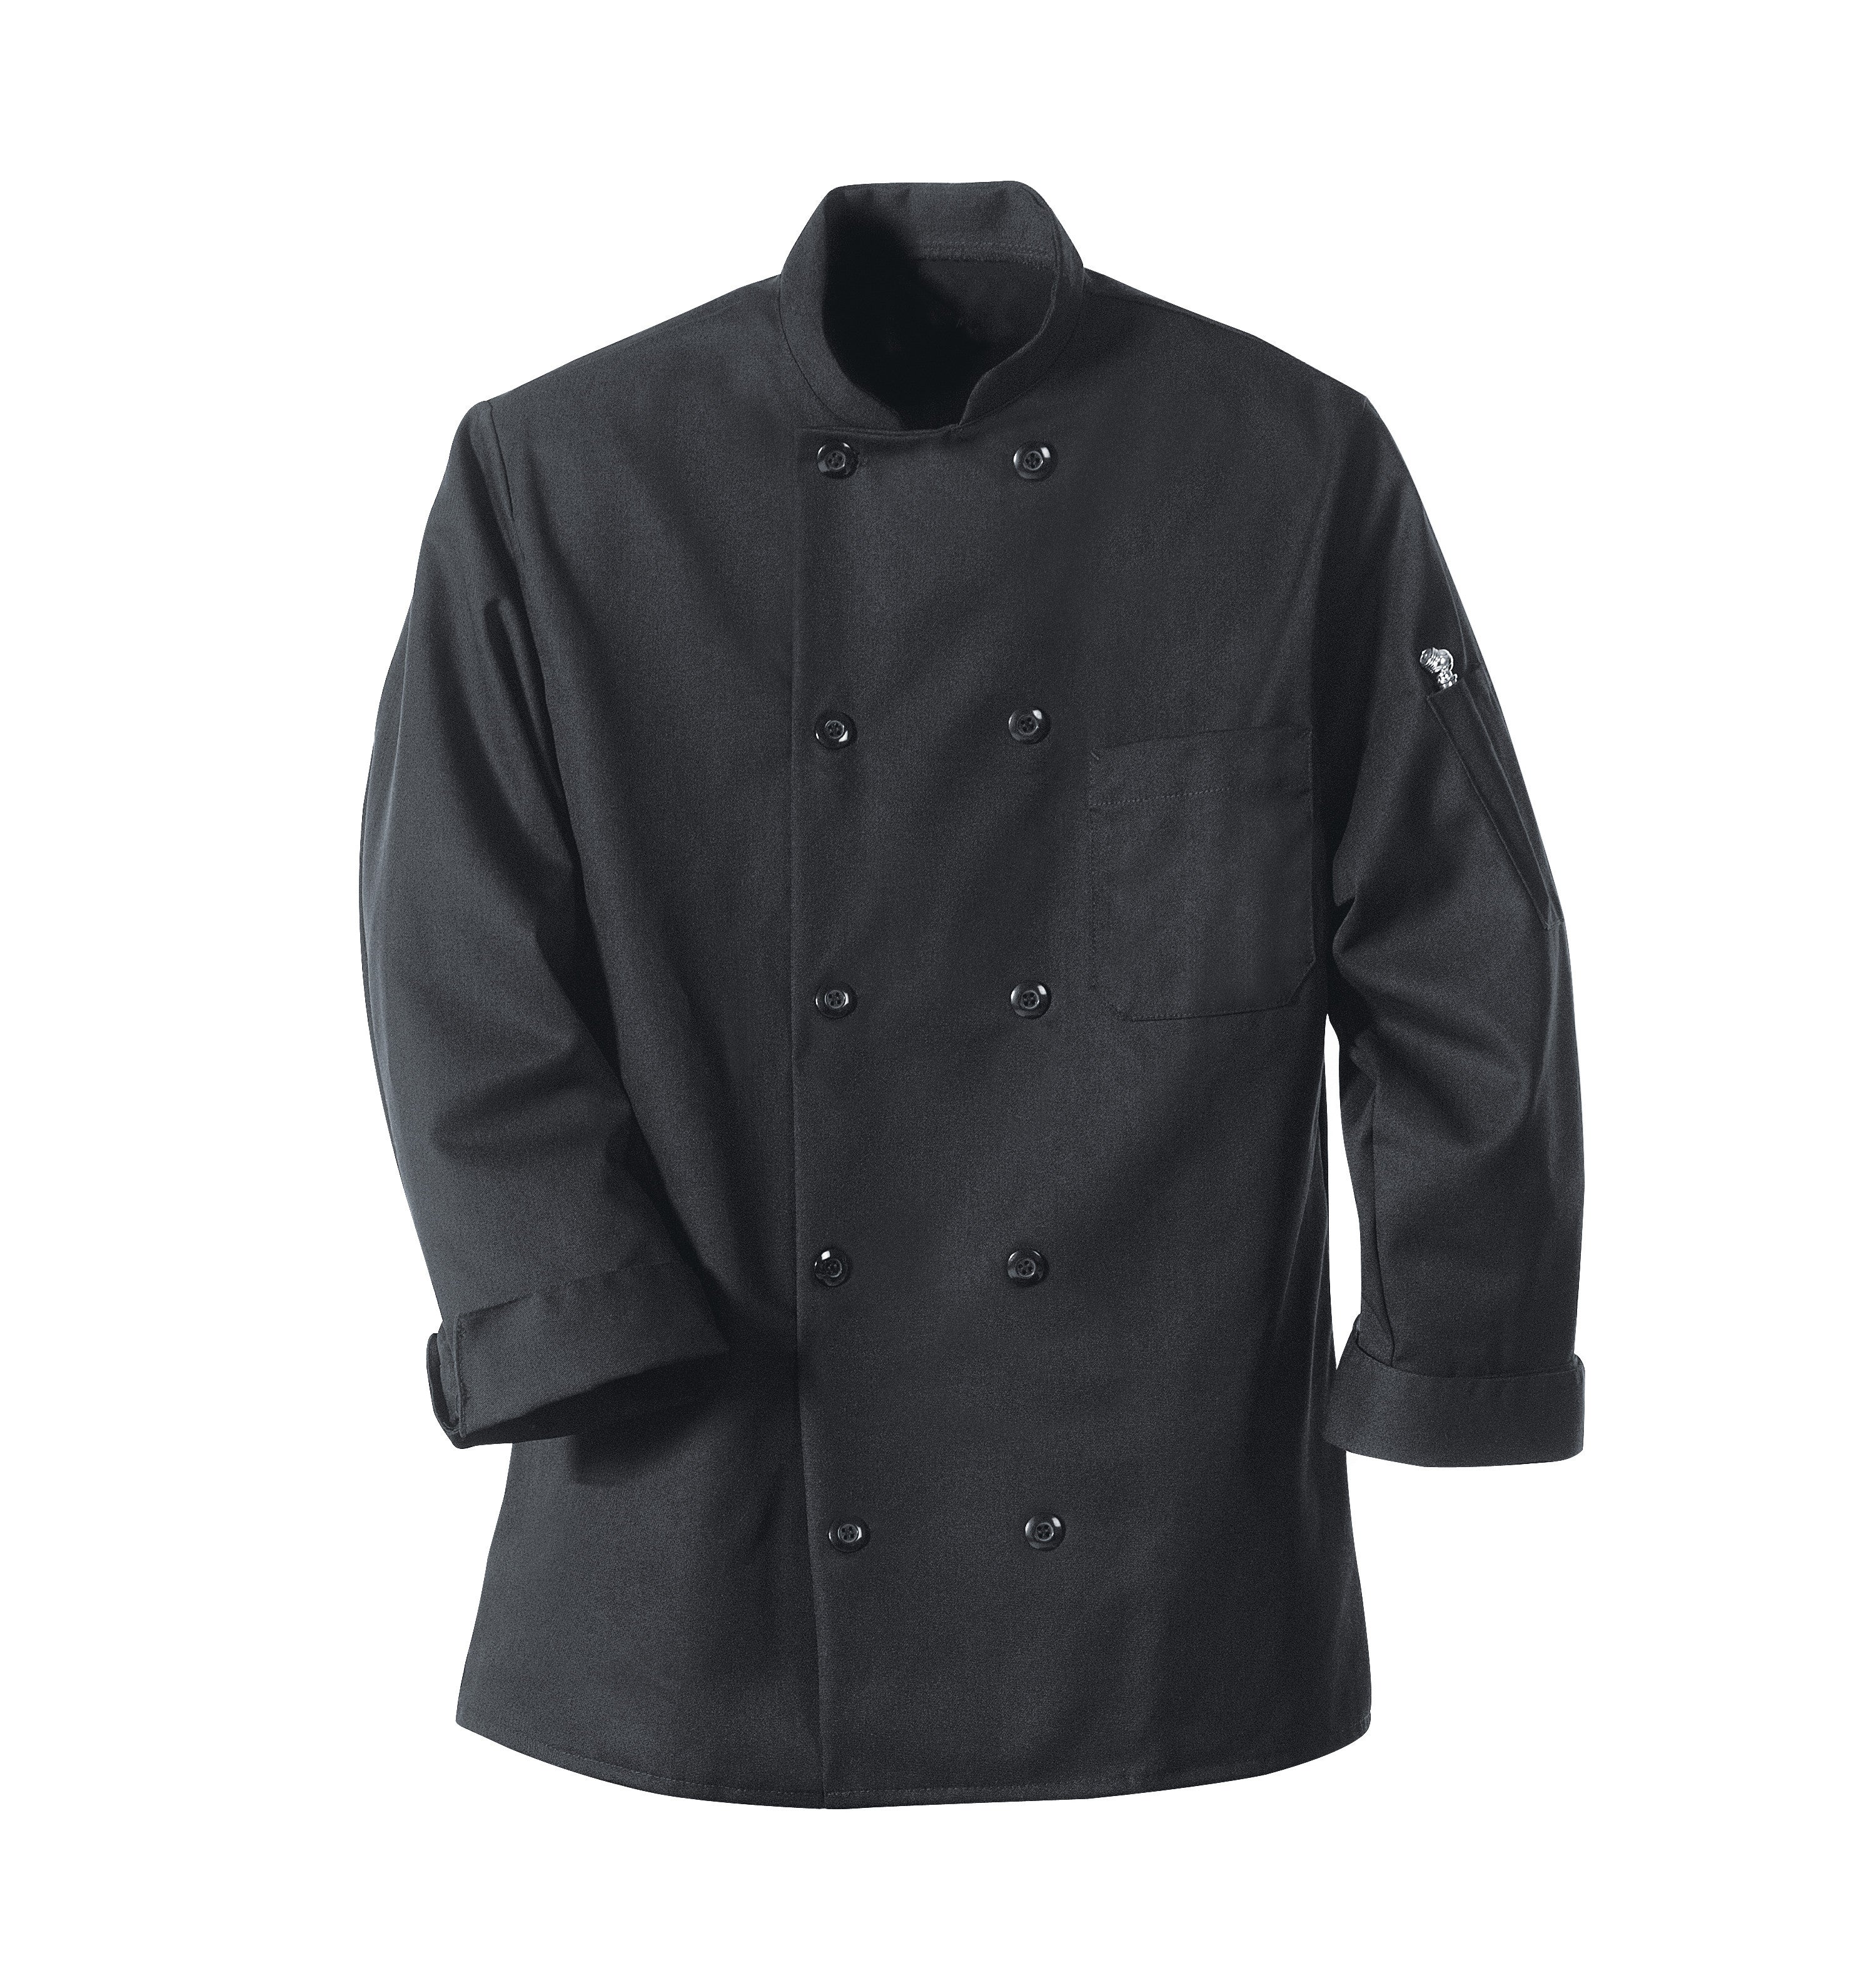 Black Chef Coat Ten Pearl Buttons 0425 - Black-eSafety Supplies, Inc